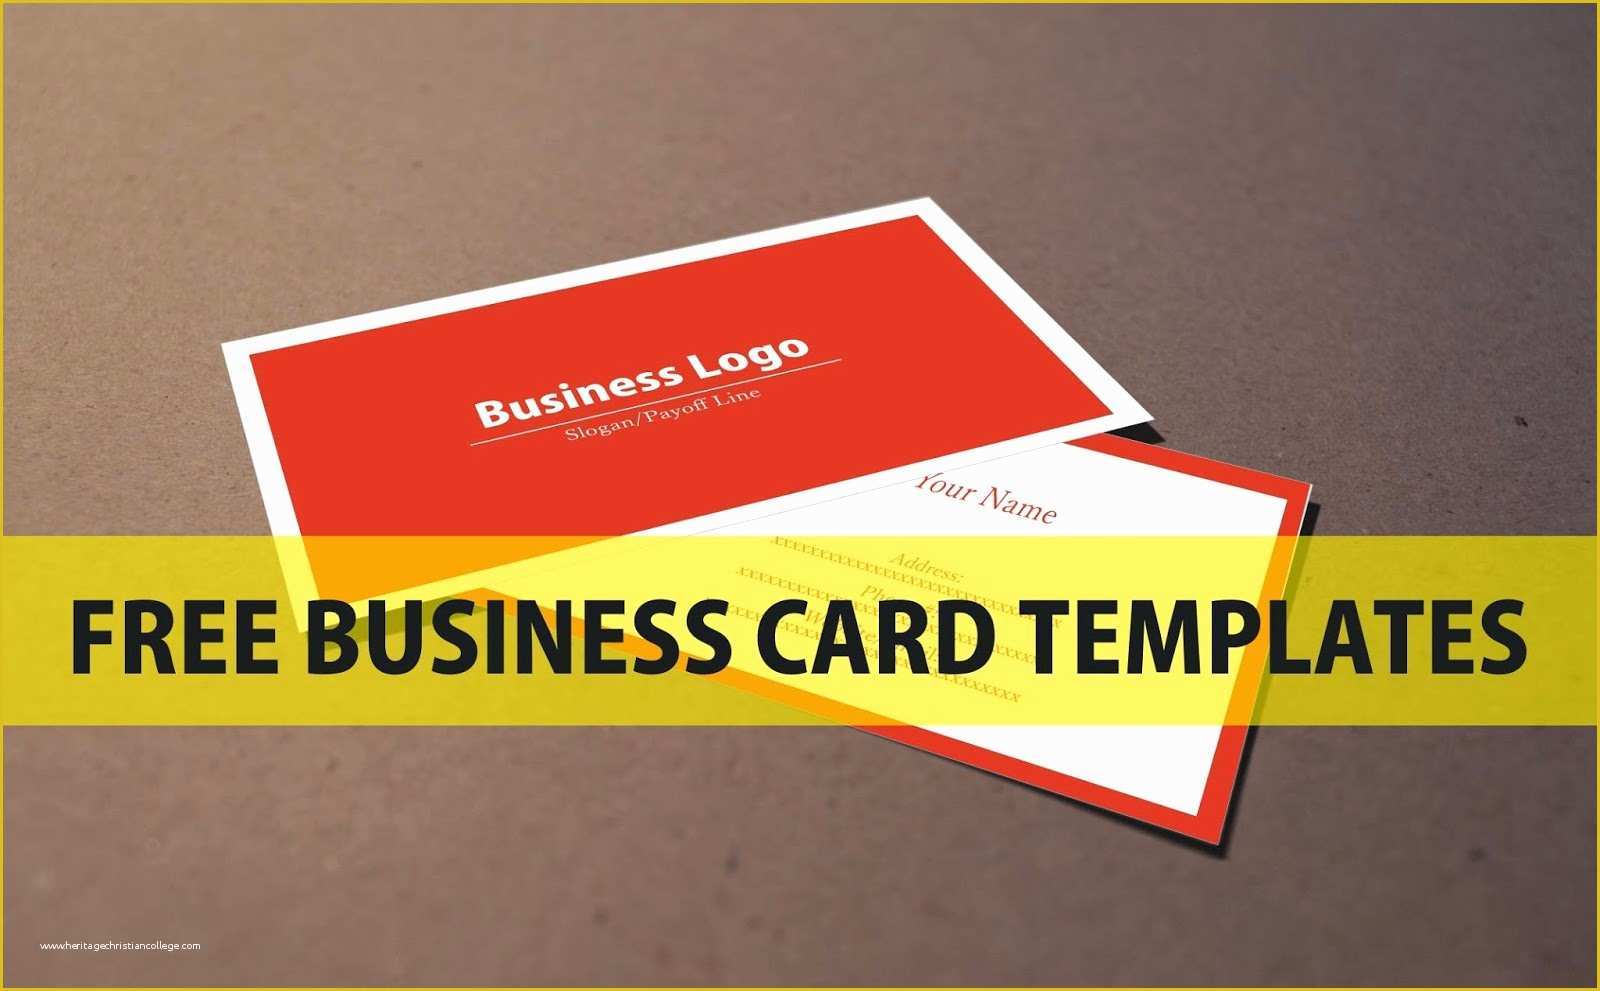 Photo Business Cards Templates Free Of Free Business Card Template